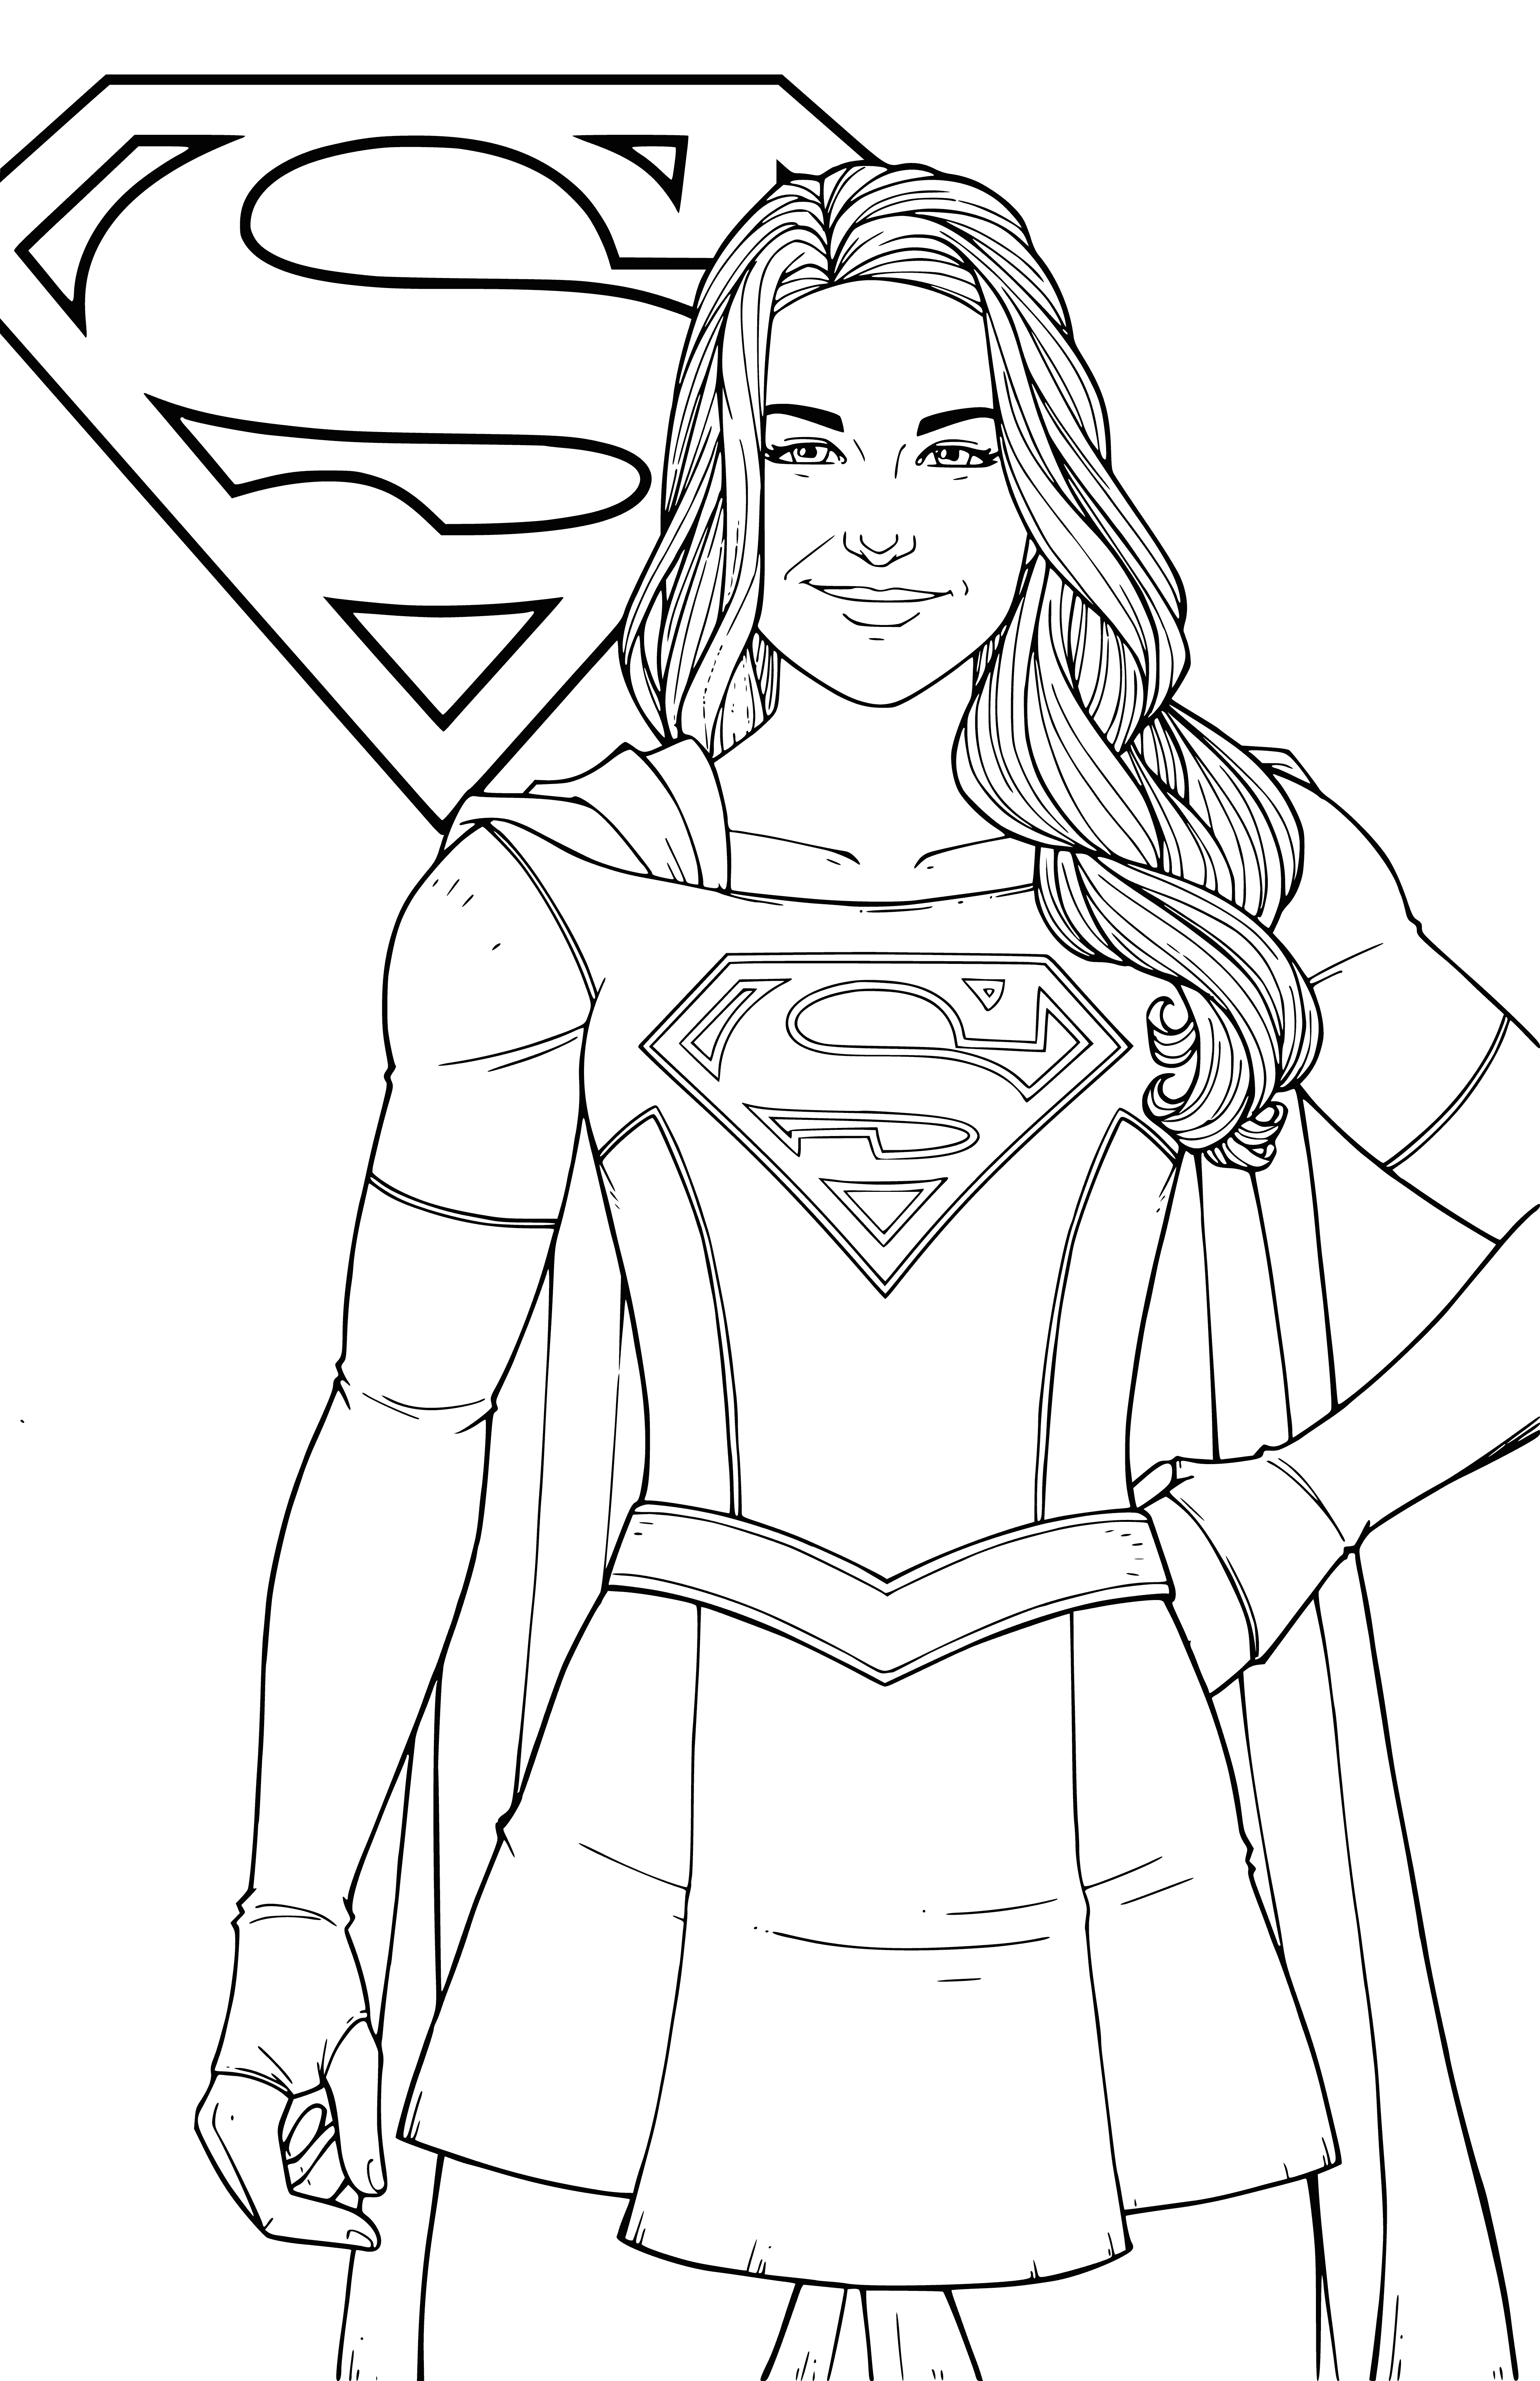 coloring page: Supergirl wears a cape and mask, using her superpowers to soar through the air! #Superhero